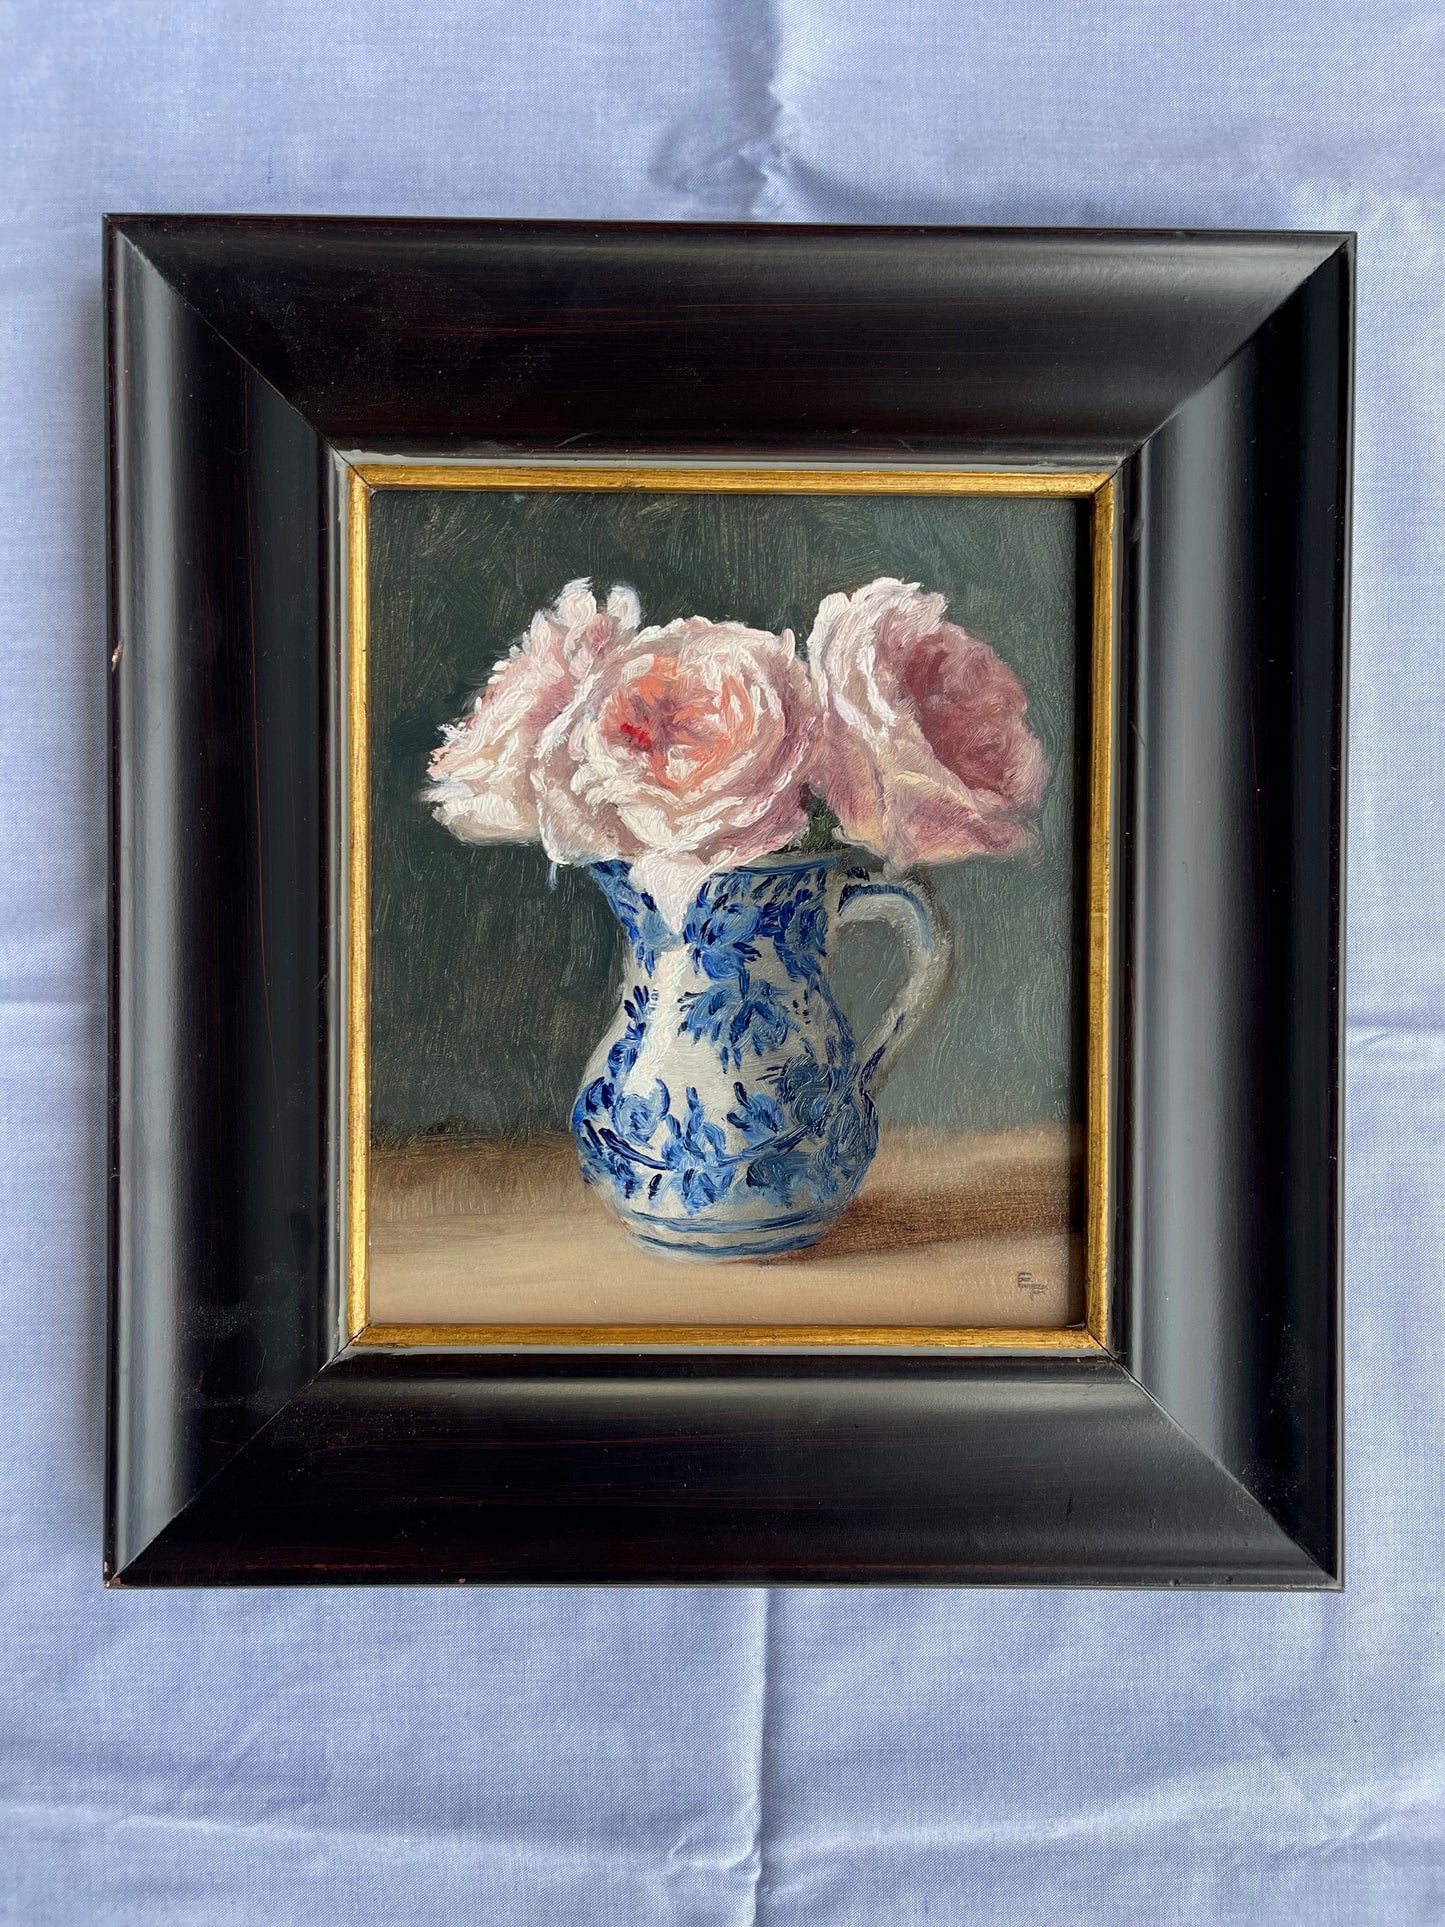 Three Roses in Delft Creamer, 8 x 7 inches, oil painting, framed